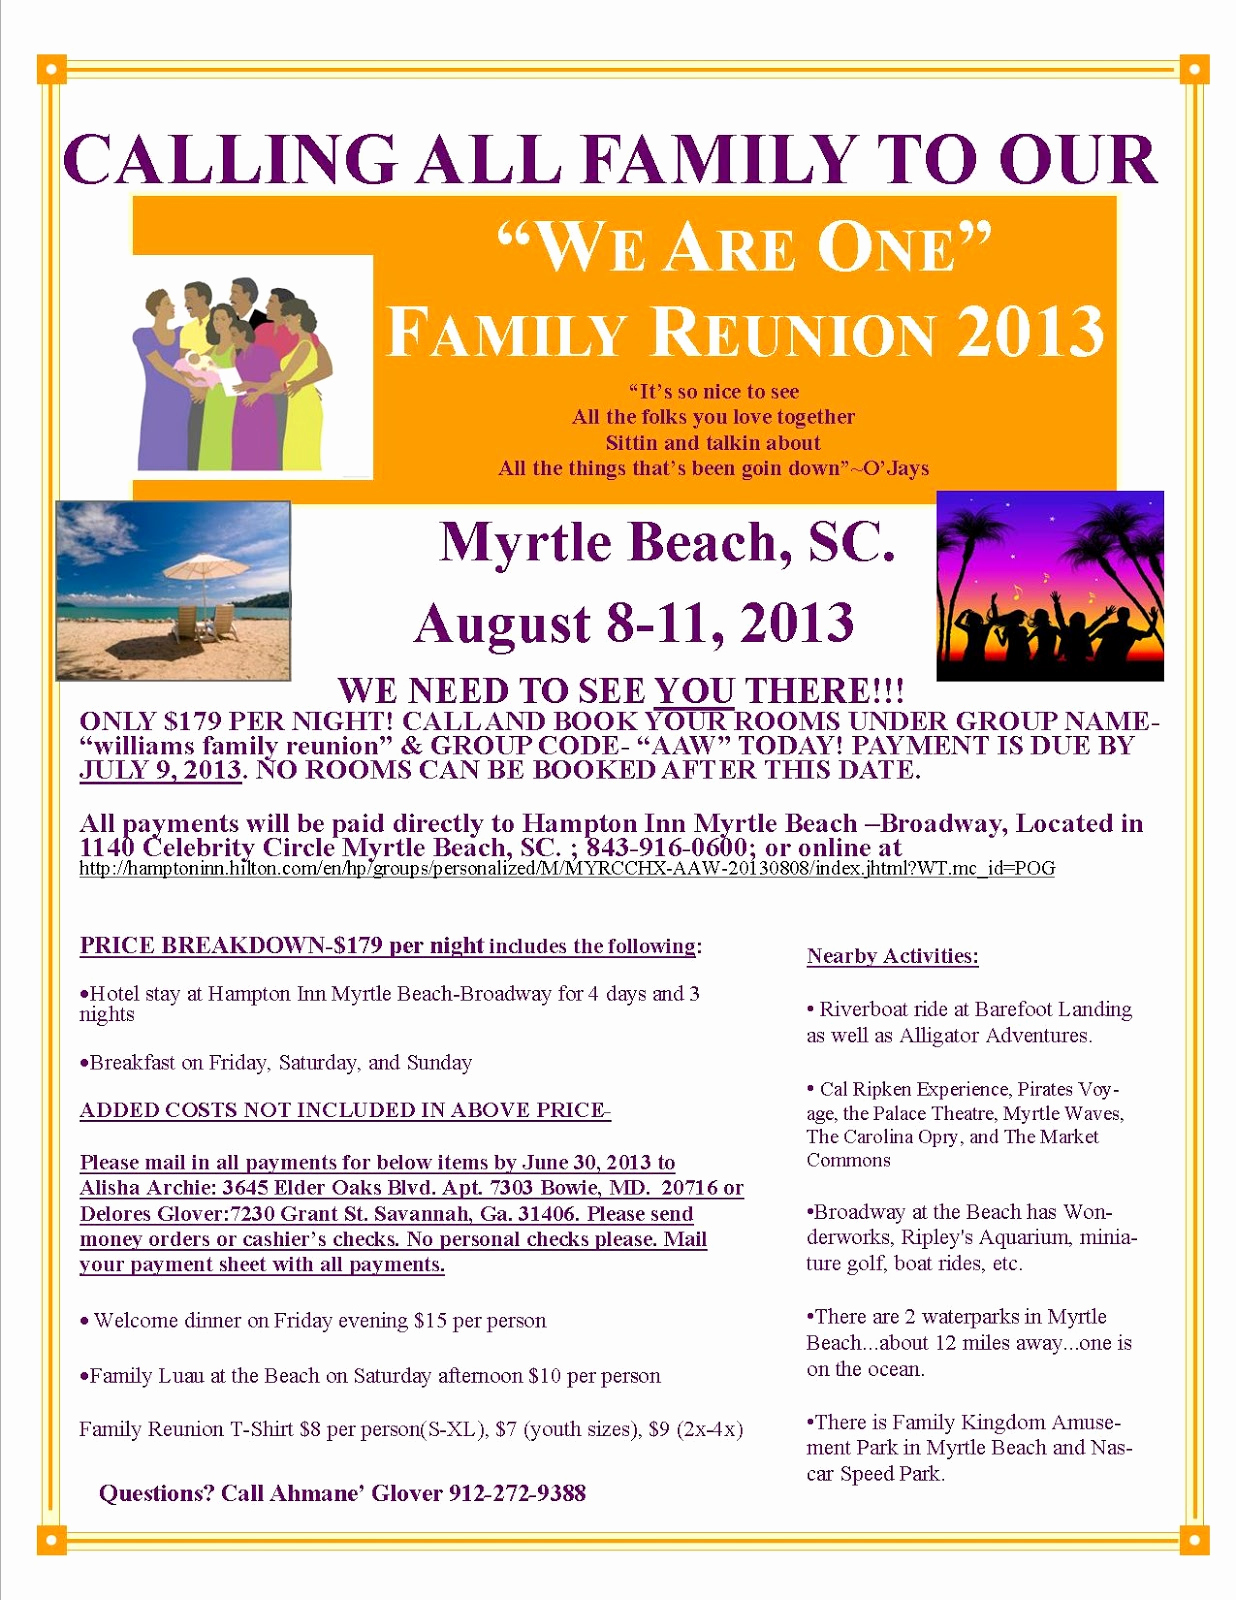 Family Reunion Flyers Templates Lovely We are E Family Reunion